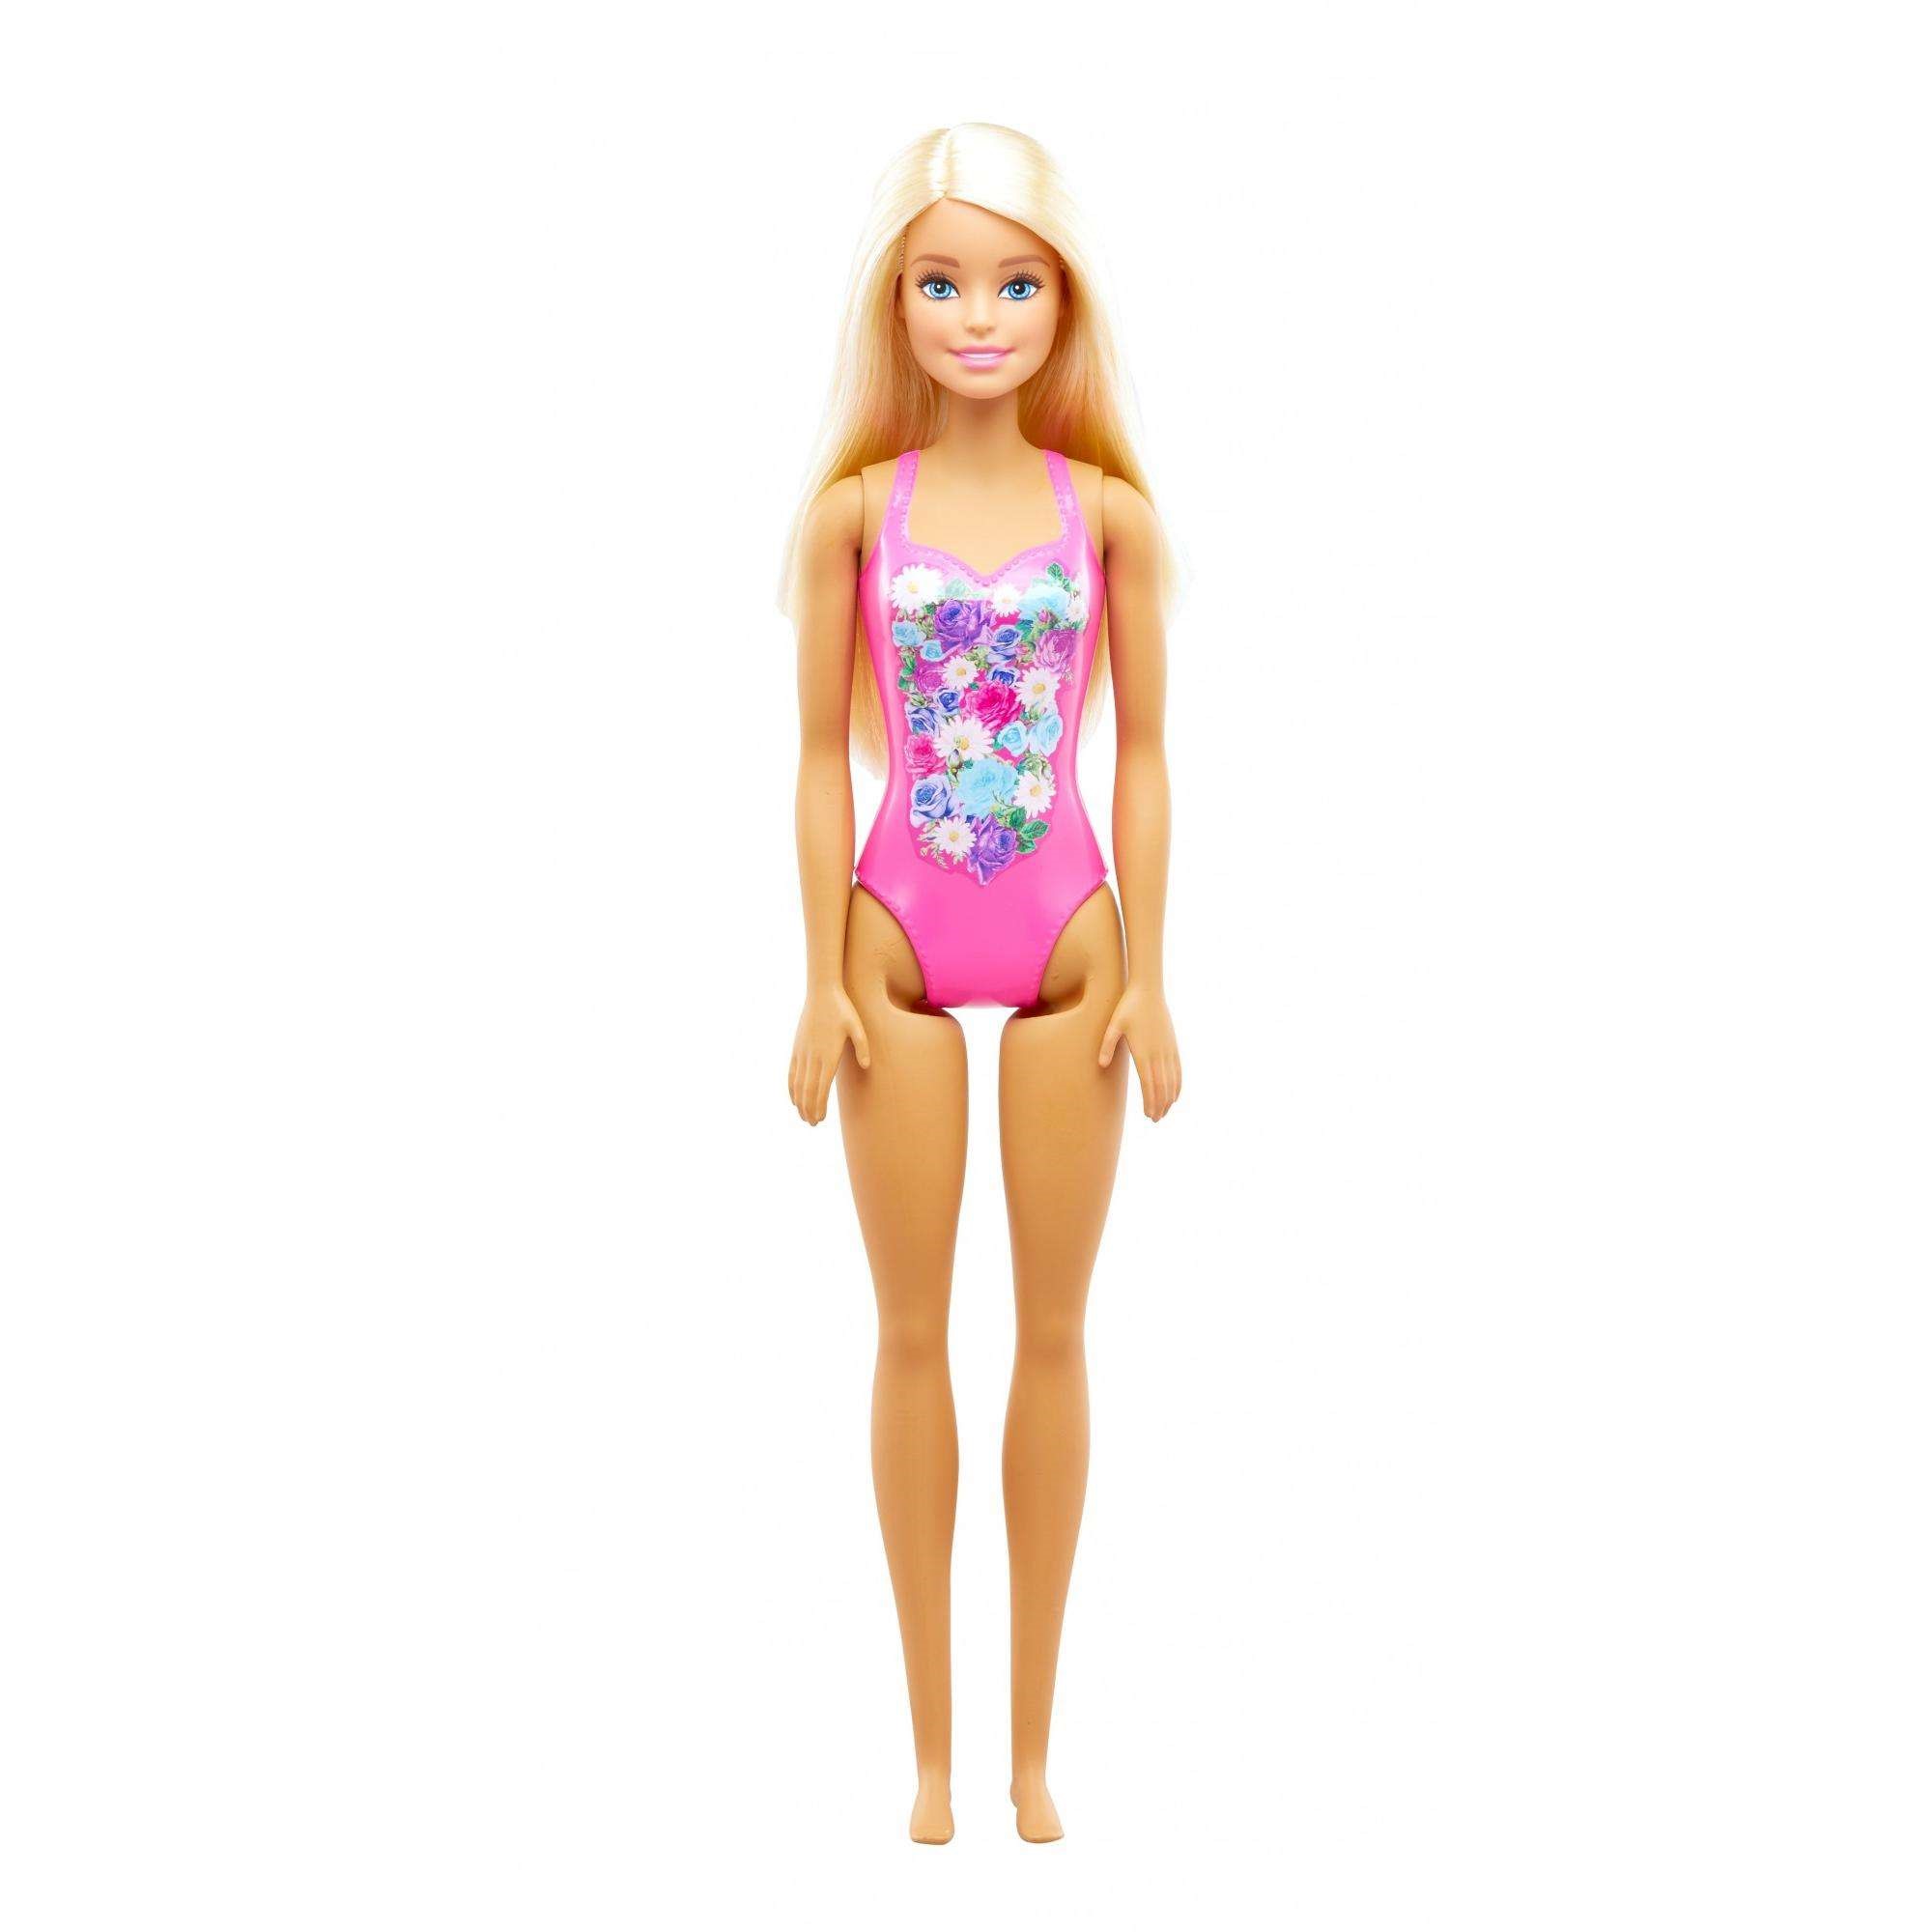 Barbie Beach Doll with Pink Graphic One-Piece Swimsuit - image 1 of 5